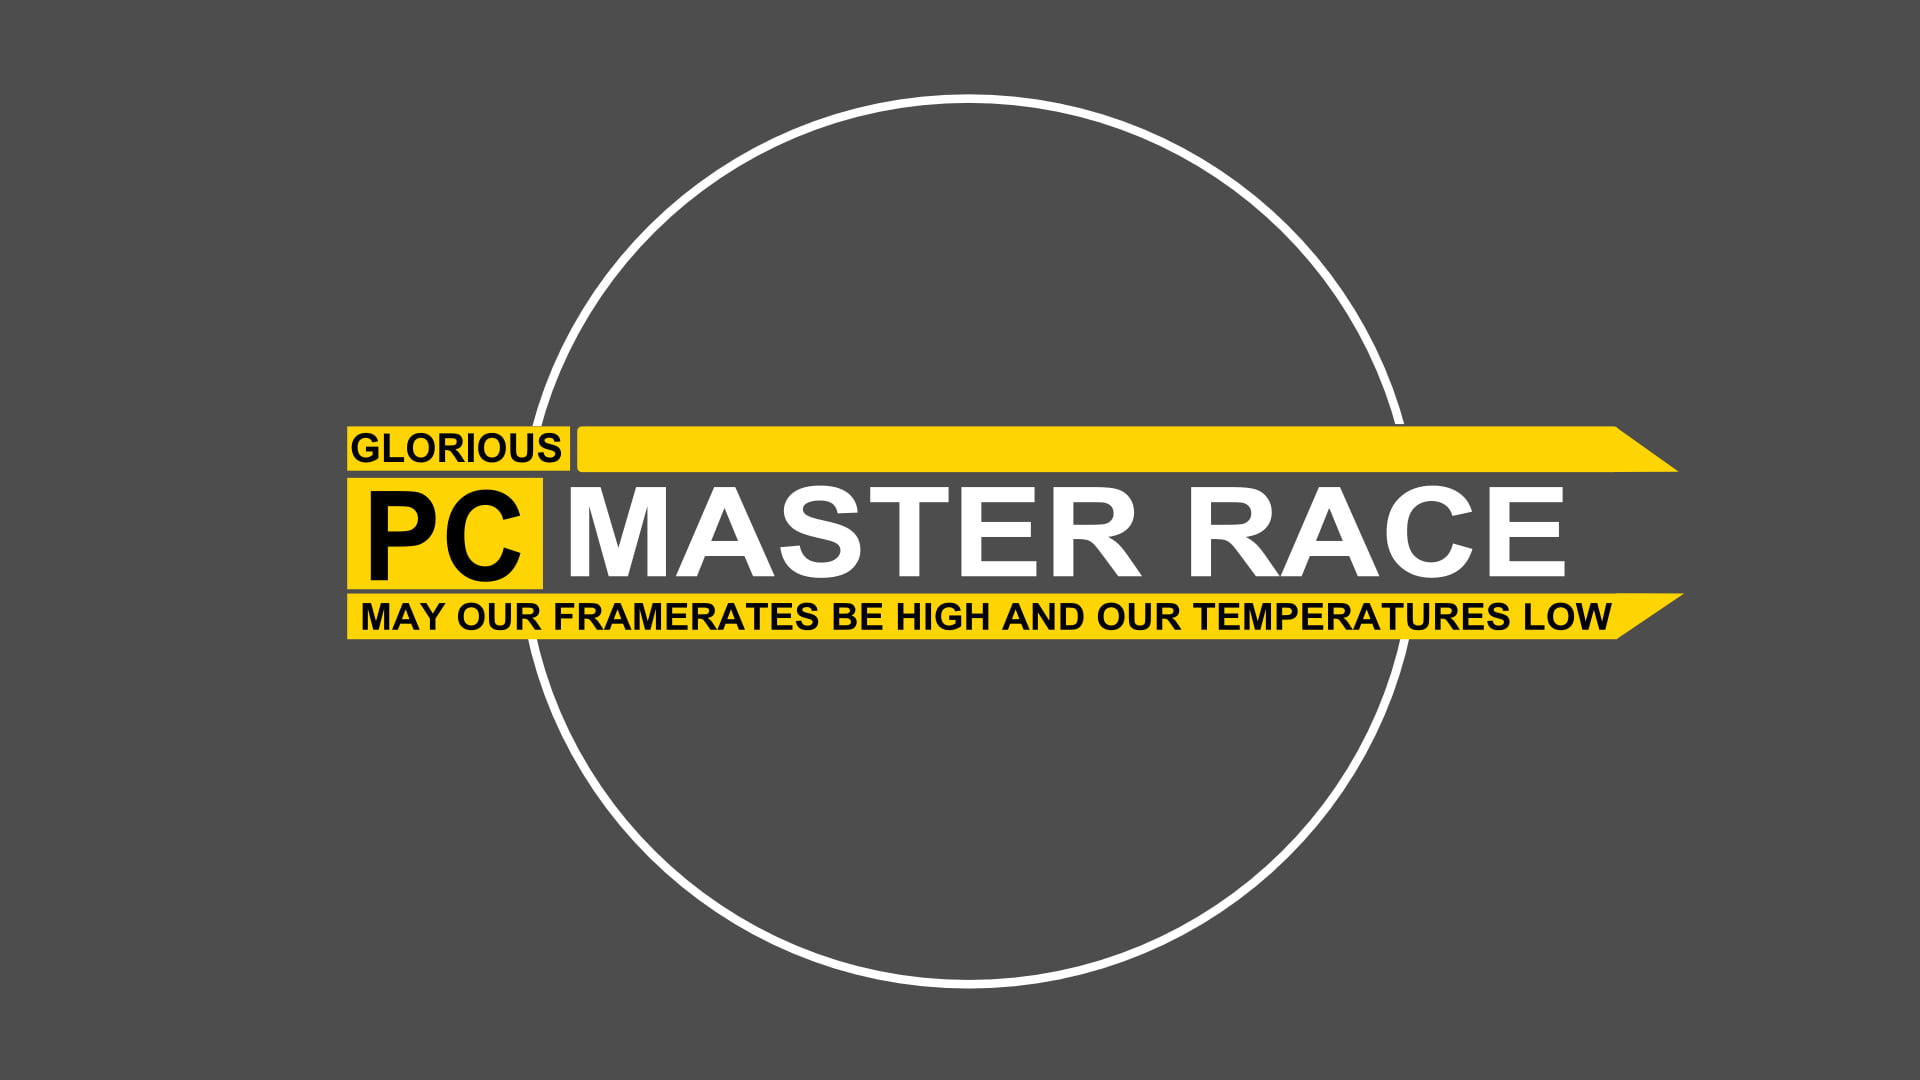 PC Master Race logo, PC gaming, Master Race, text, simple background